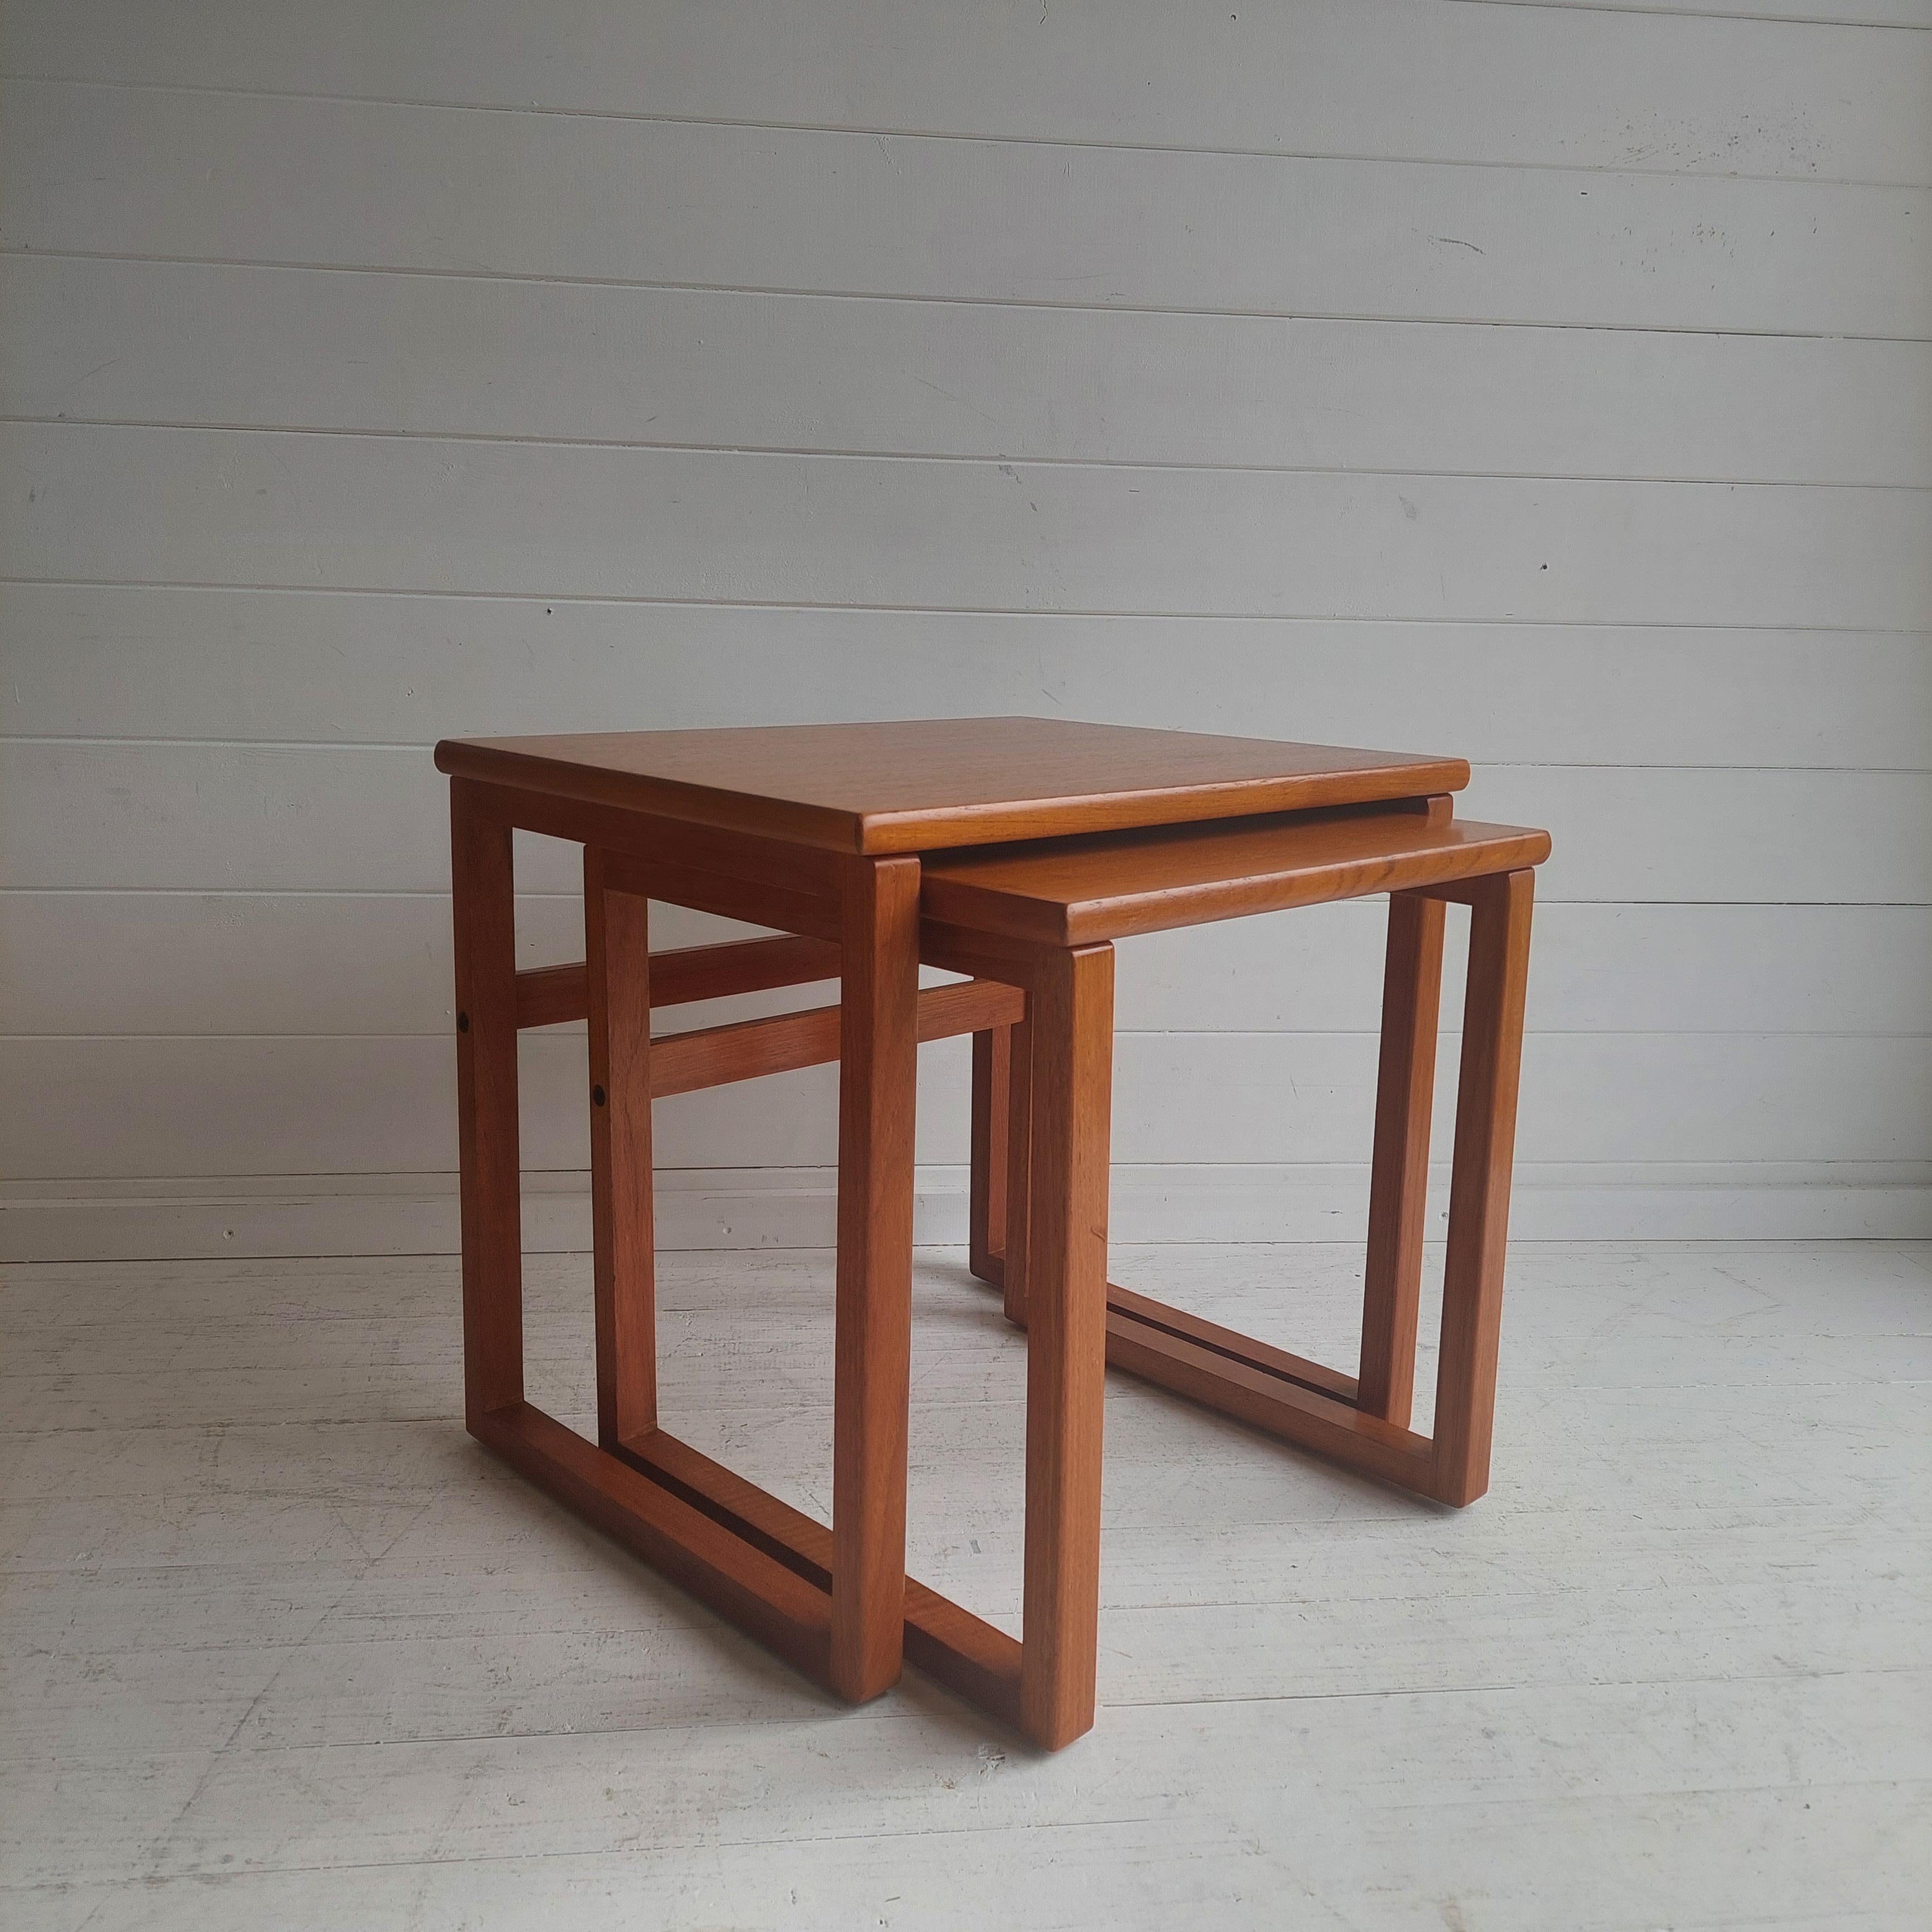 An understated, minimalist nest of teak mid century modern tables, c.1970s/80s
A very elegant design with beautiful styled modulars leg style base.
Mid century nest of two tables

The tables as been totally restored and look stunning.
Such a